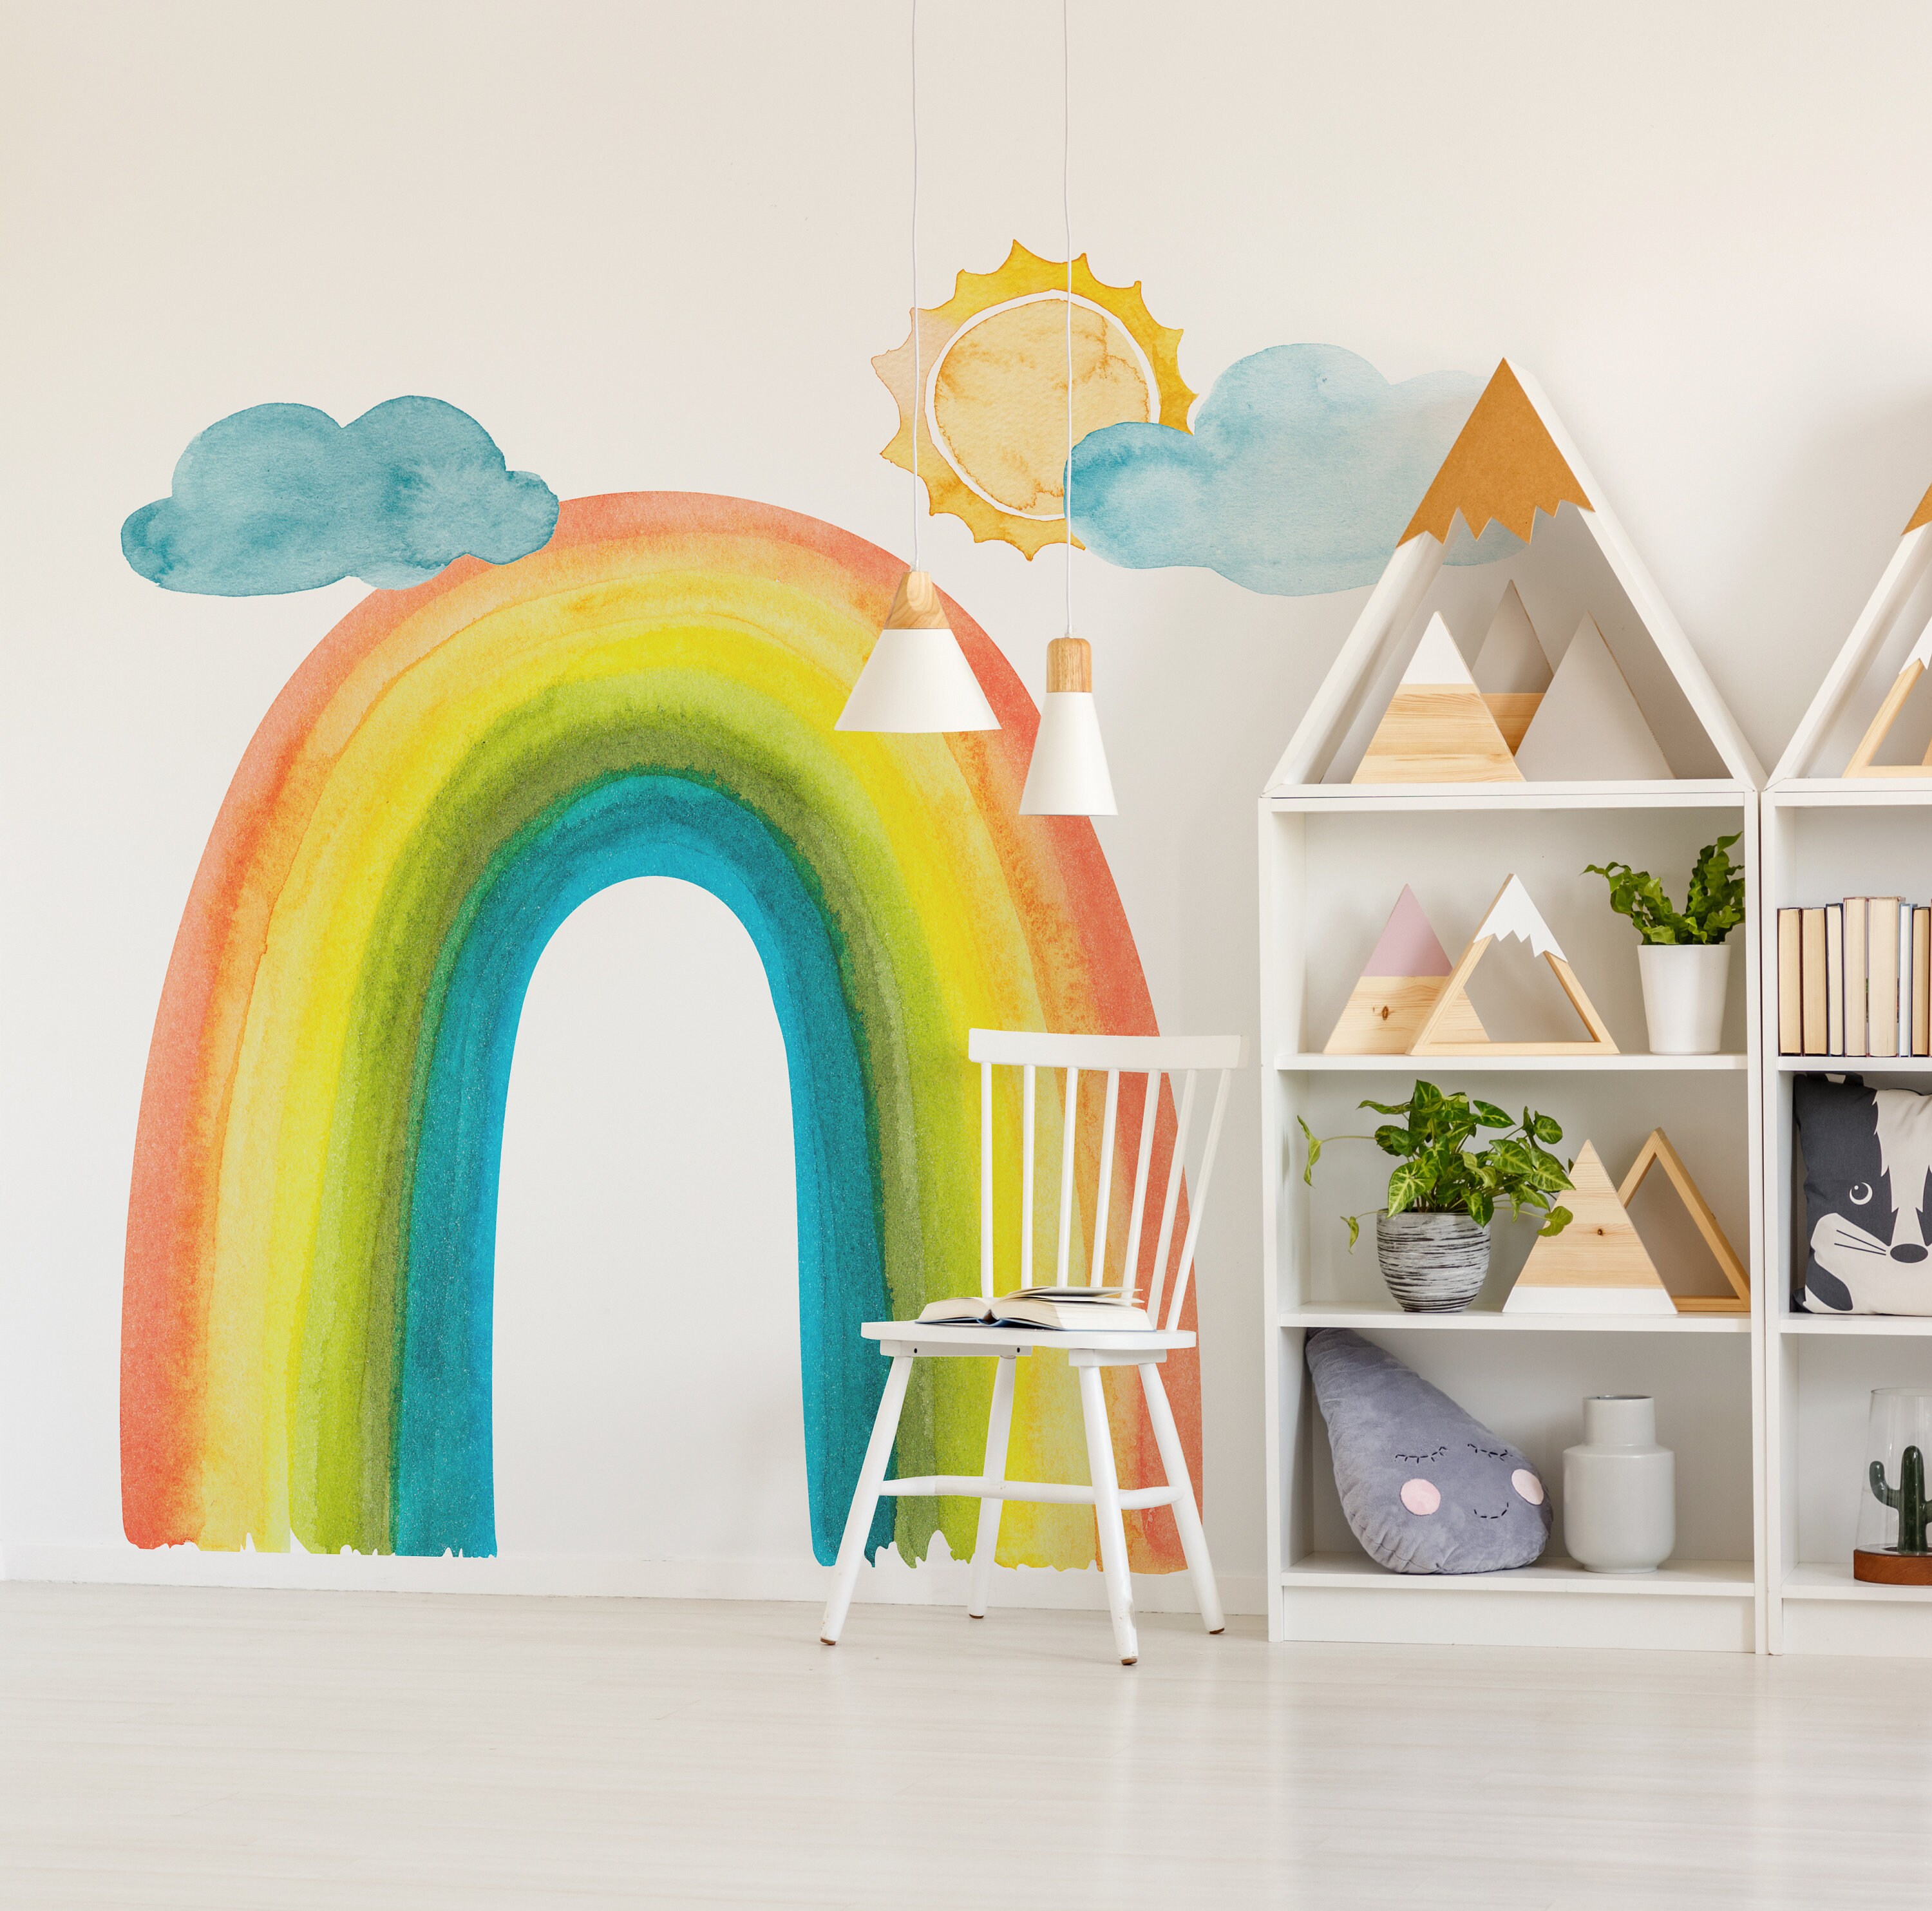 Genevieve's 'Let's Make a Rainbow' Care Bears Party - Project Nursery